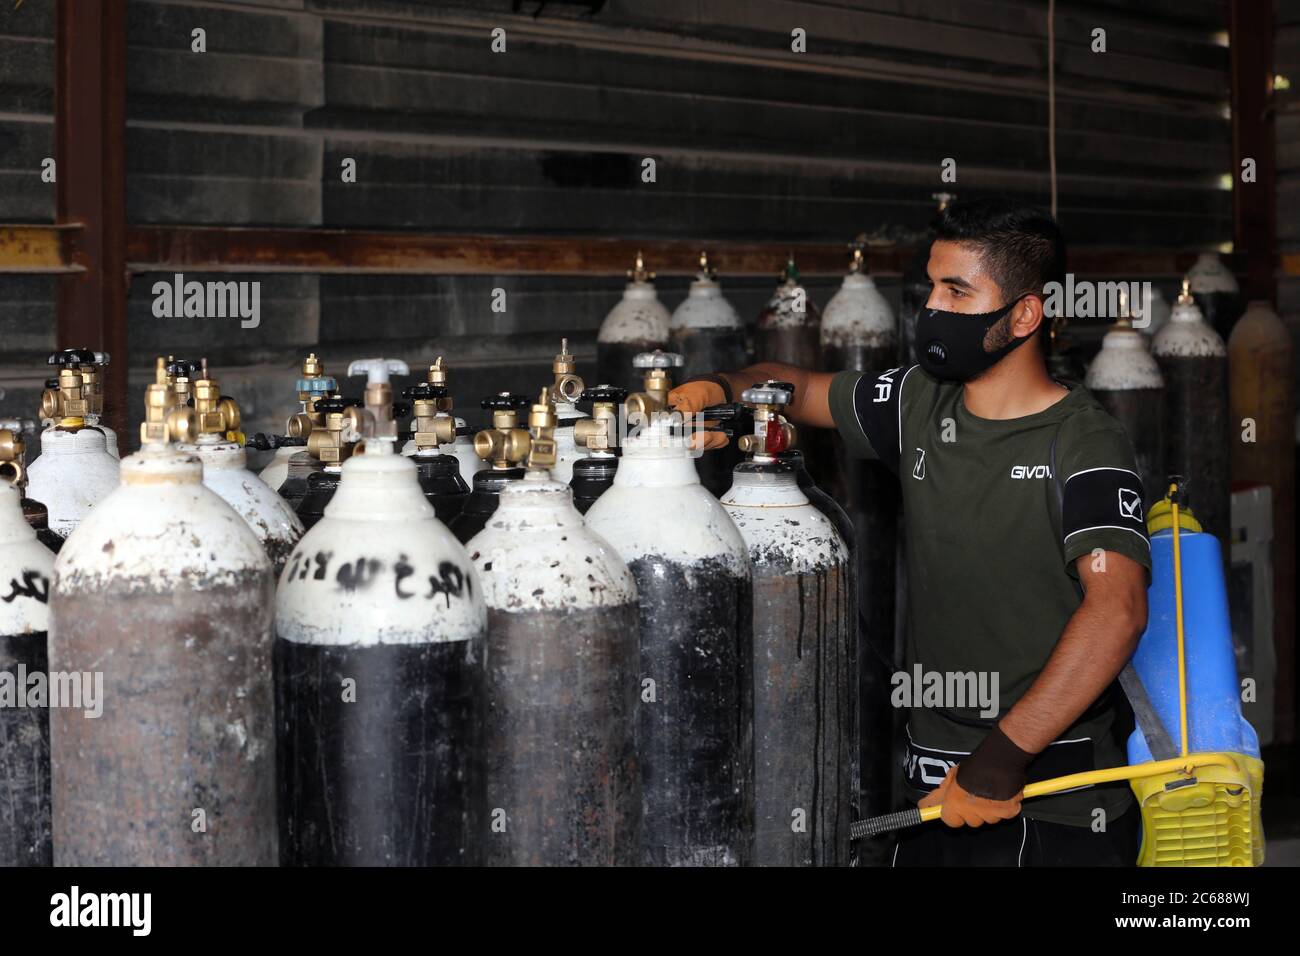 Baghdad. 7th July, 2020. A man works at an oxygen refilling station in Baghdad, Iraq, on July 7, 2020. A government-owned oxygen filling factory in Iraq has increased its filling of oxygen cylinders and the liquid gas to meet the demand of the Iraqi hospitals amid the continued rise in COVID-19 infections. The resurgence of COVID-19 pandemic continued in Iraq on Tuesday, as the Iraqi Health Ministry confirmed 2,426 new cases, bringing the total number of coronavirus infections nationwide to 64,701. Credit: Xinhua/Alamy Live News Stock Photo